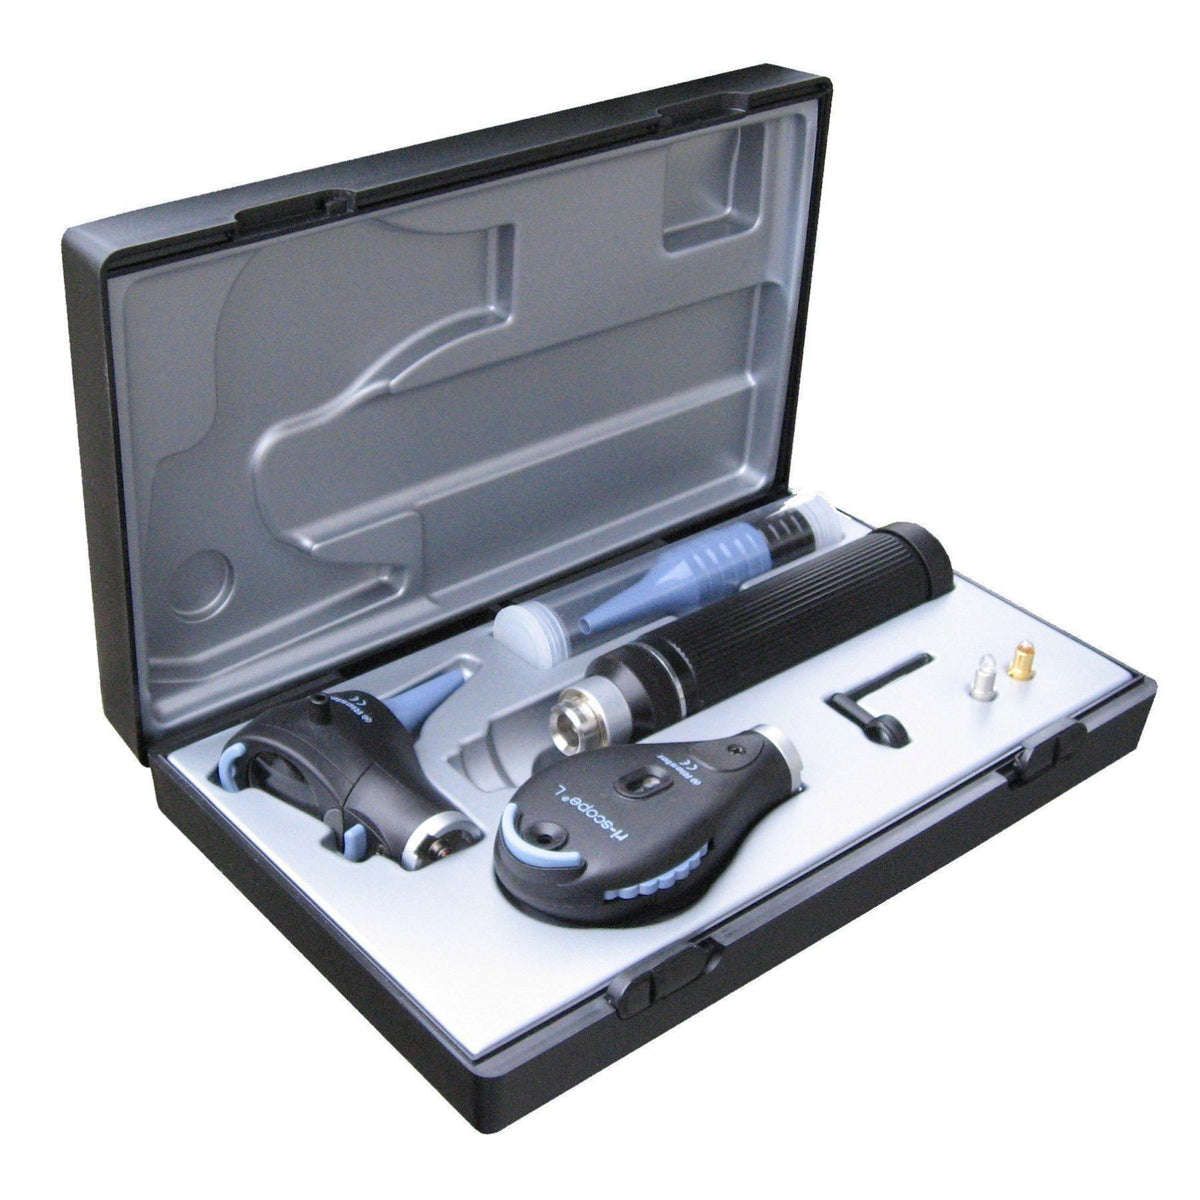 Riester Ri-Scope L Otoscope / Ophthalmoscope L1 XL/LED 3.5 V C Handle for 2 x Lithium Batteries